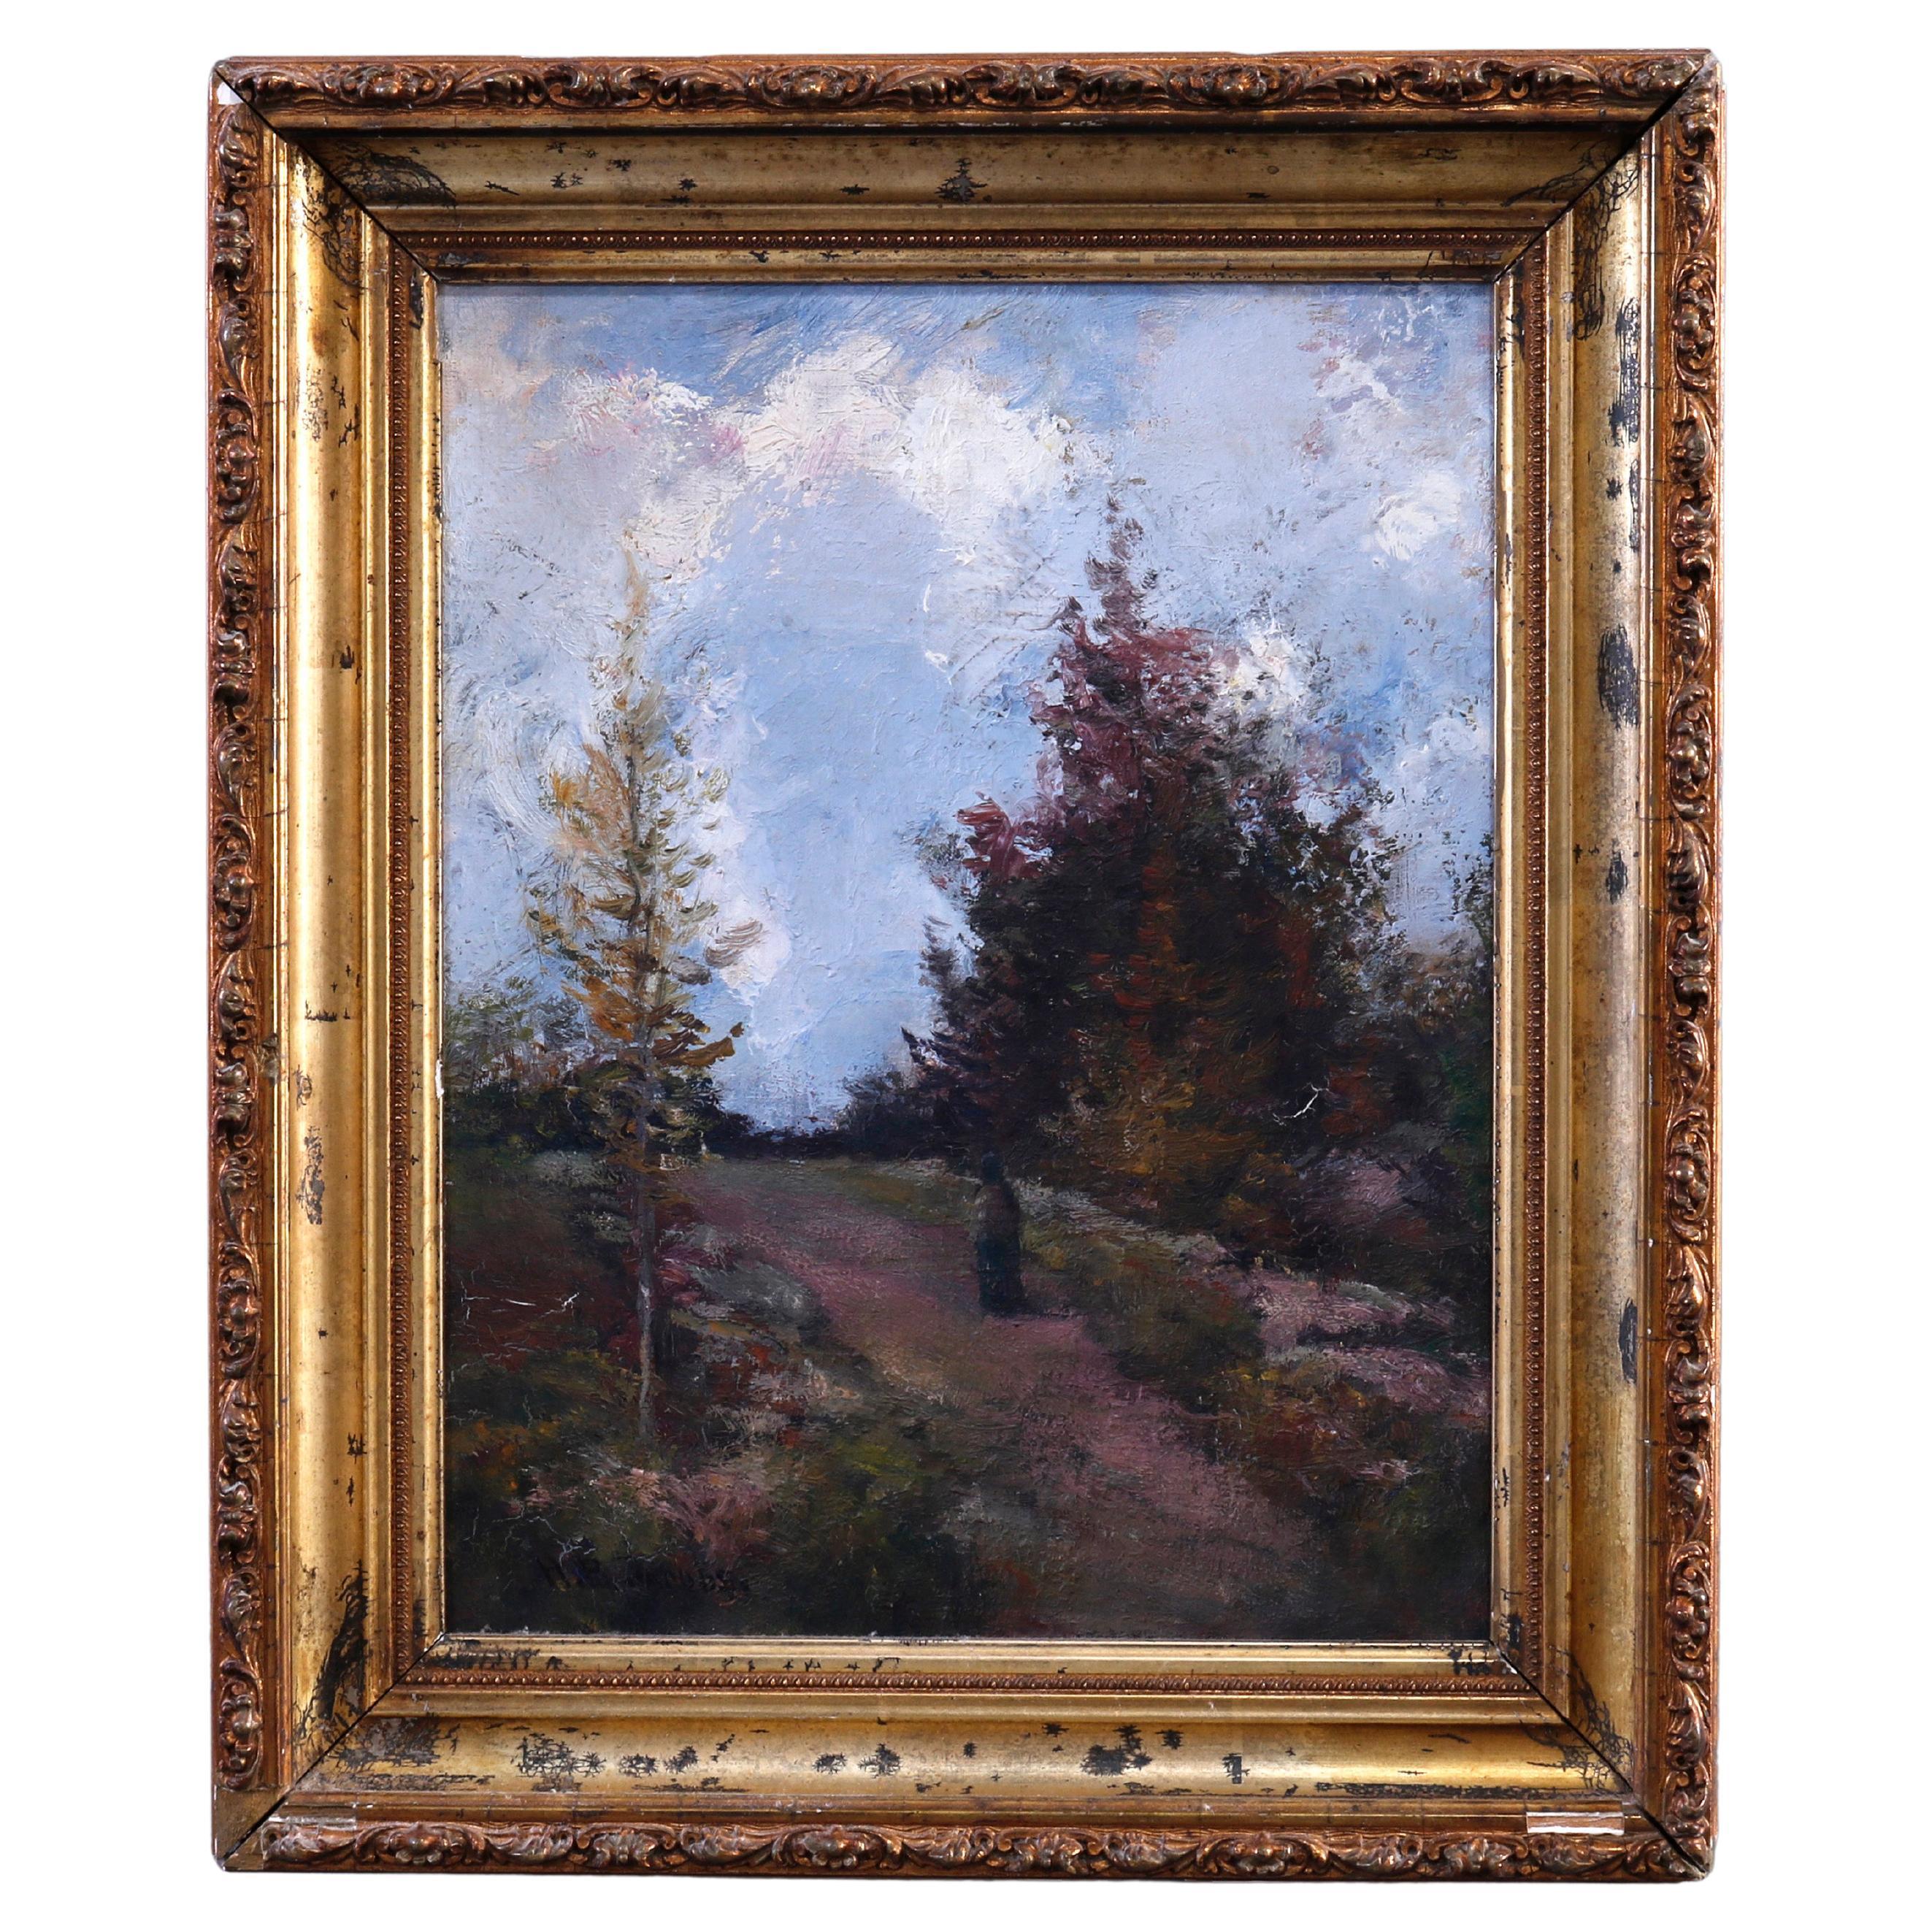 Antique Impressionist Landscape Painting "Late November" by Hobart B. Jacobs